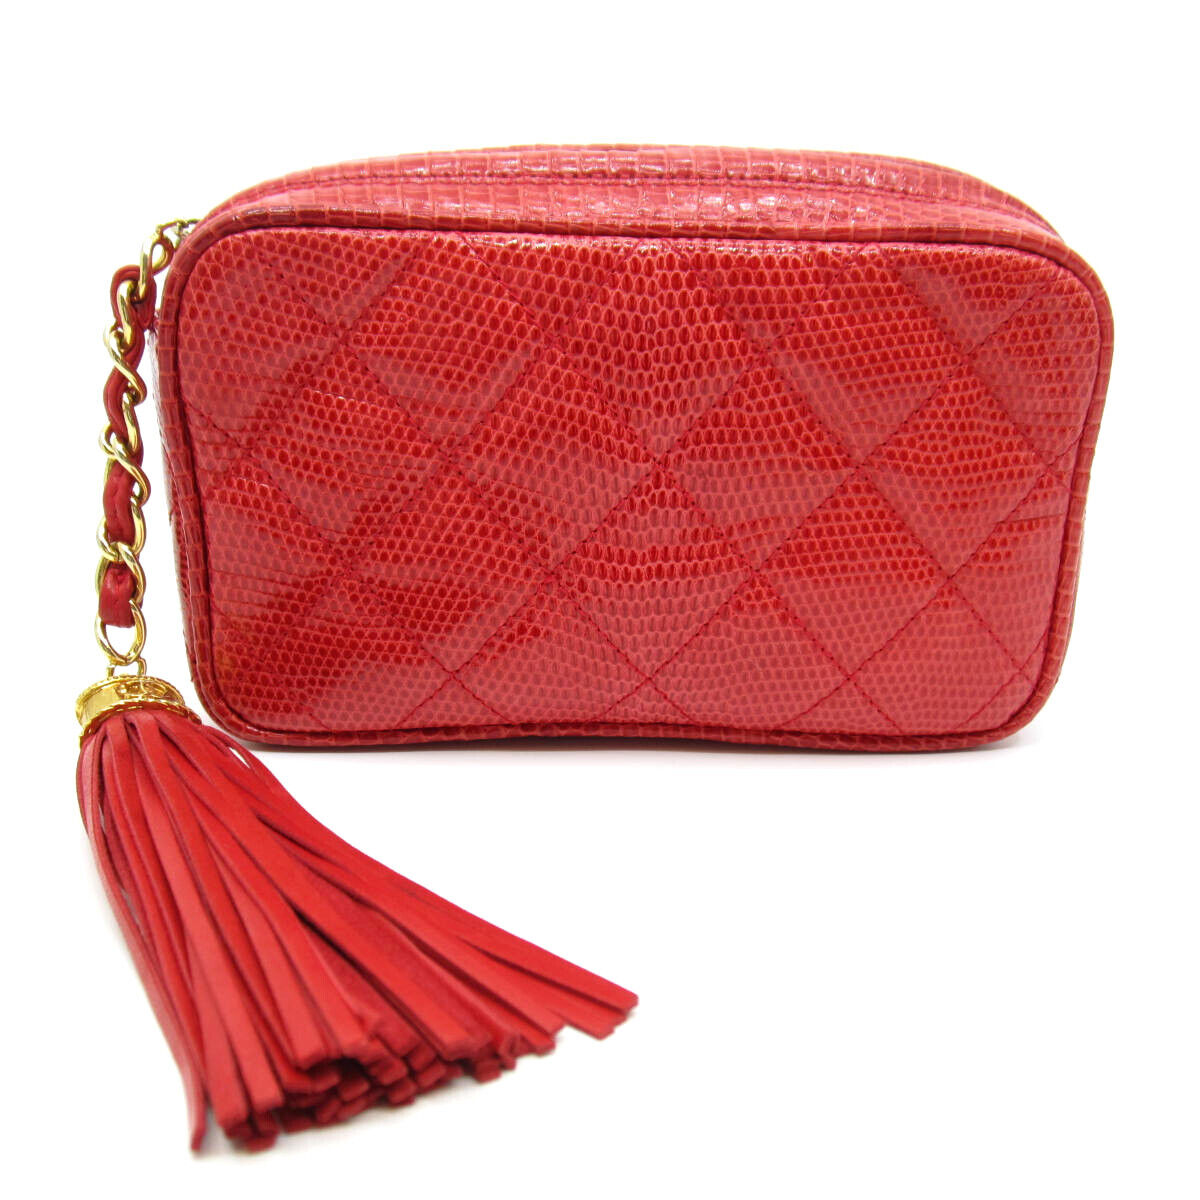 Authentic CHANEL Lizard Poach Red Leather #S190099